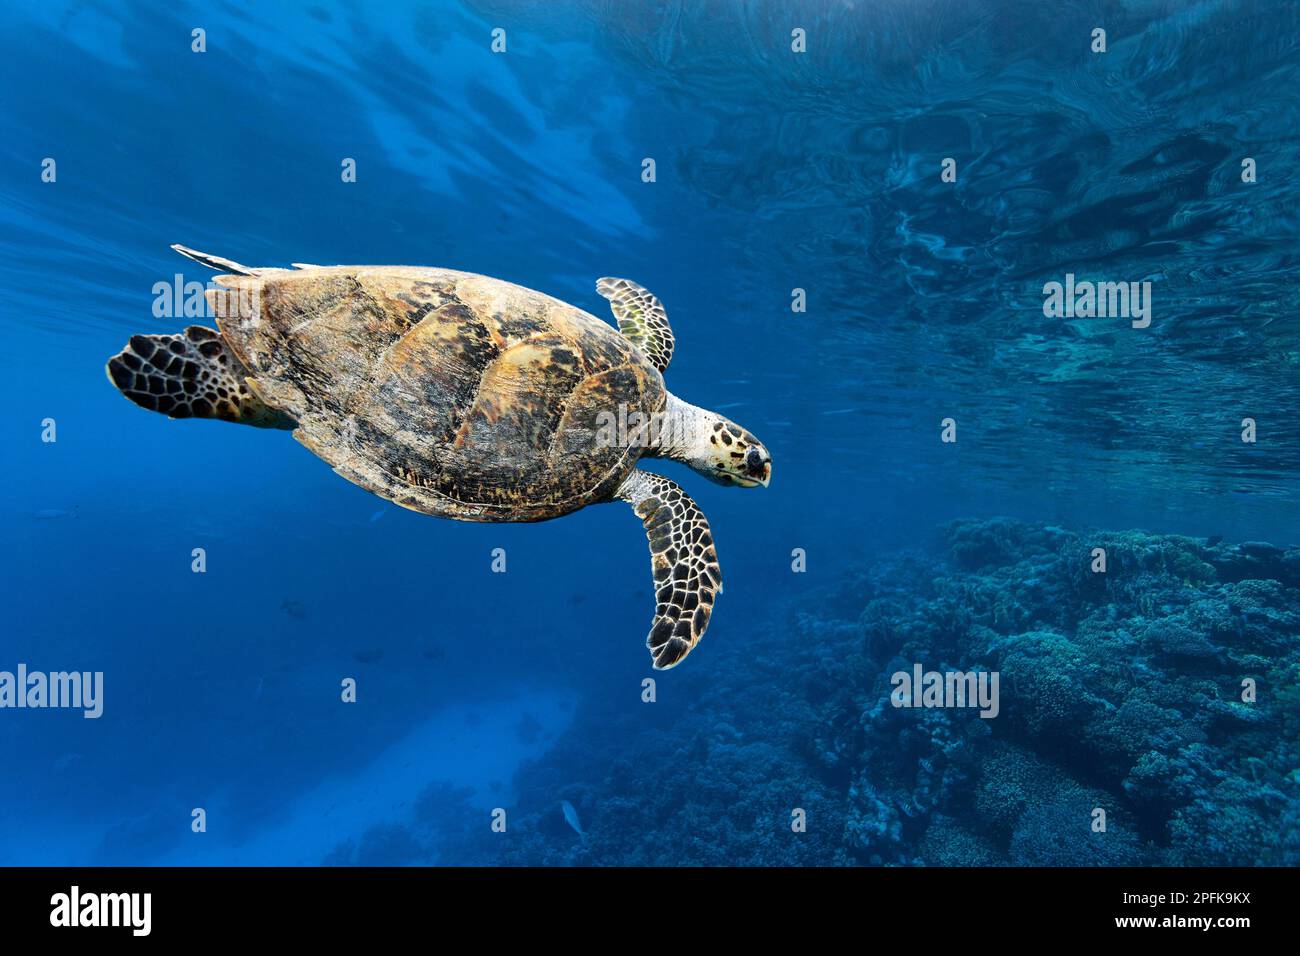 Hawksbill sea turtle (Eretmochelys imbricata) dives over coral reef, St. Johns, Red Sea, Egypt Stock Photo